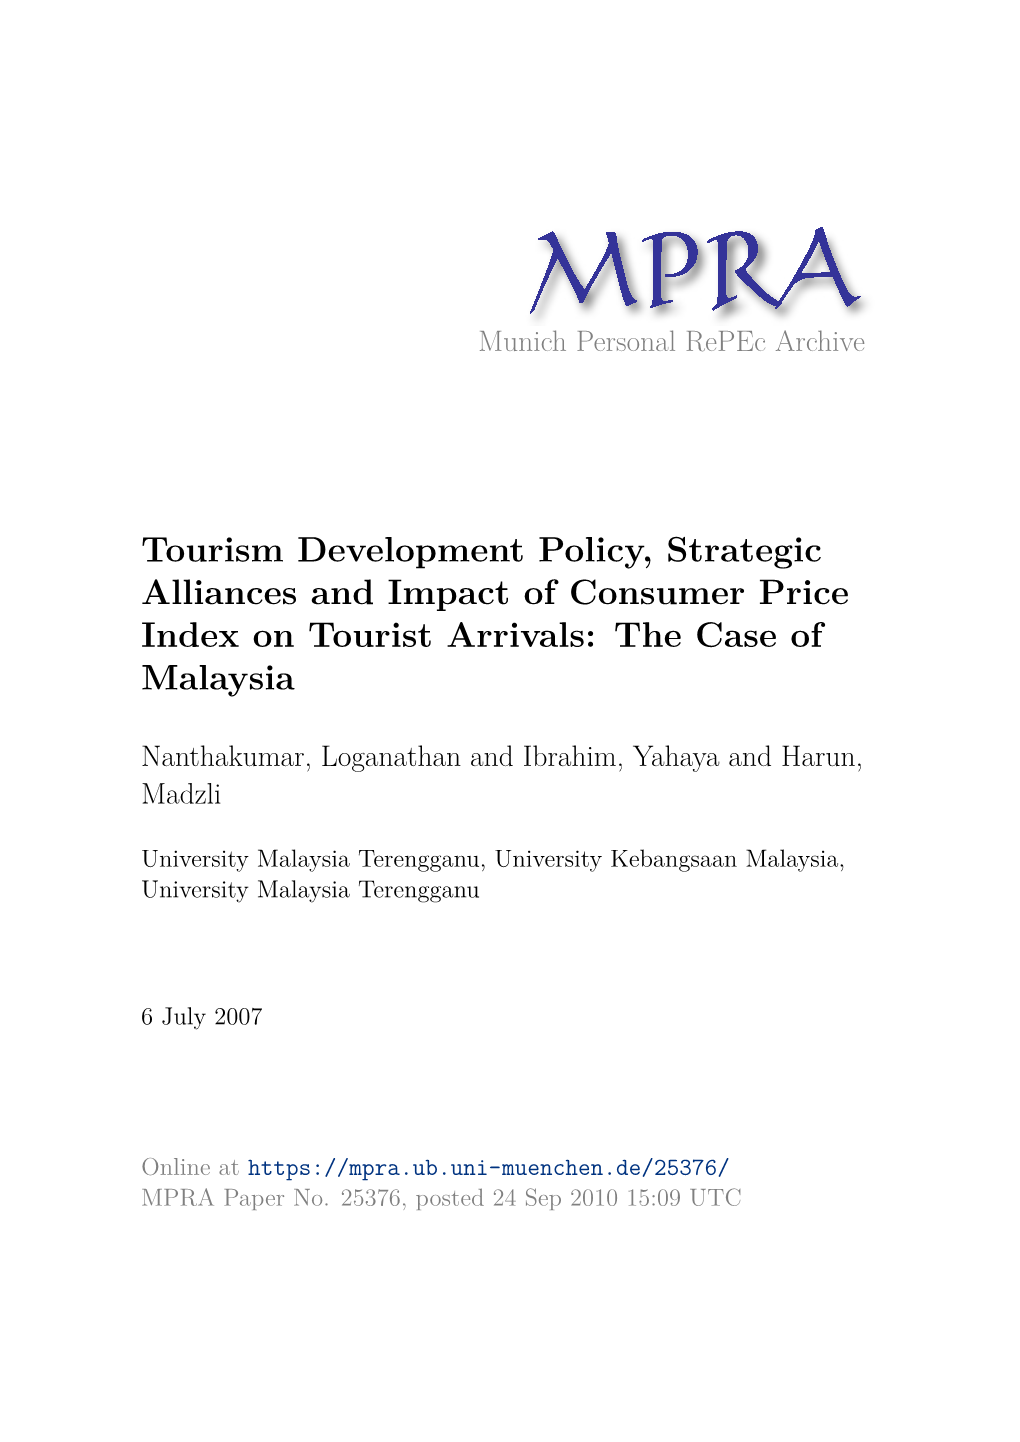 Tourism Development Policy, Strategic Alliances and Impact of Consumer Price Index on Tourist Arrivals: the Case of Malaysia